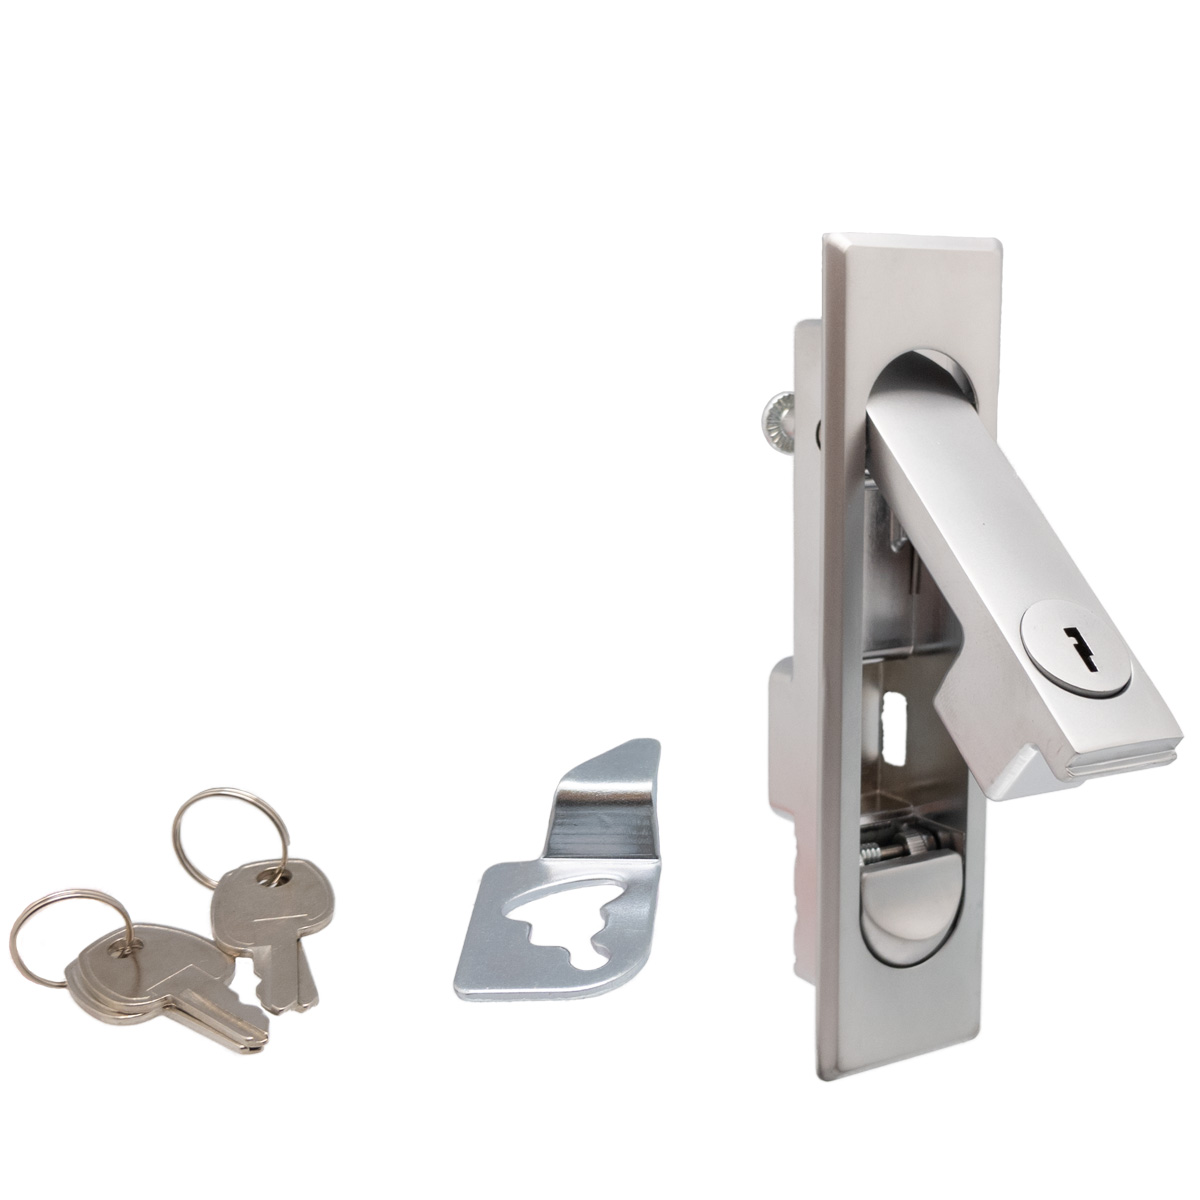 Lock for floor cabinets